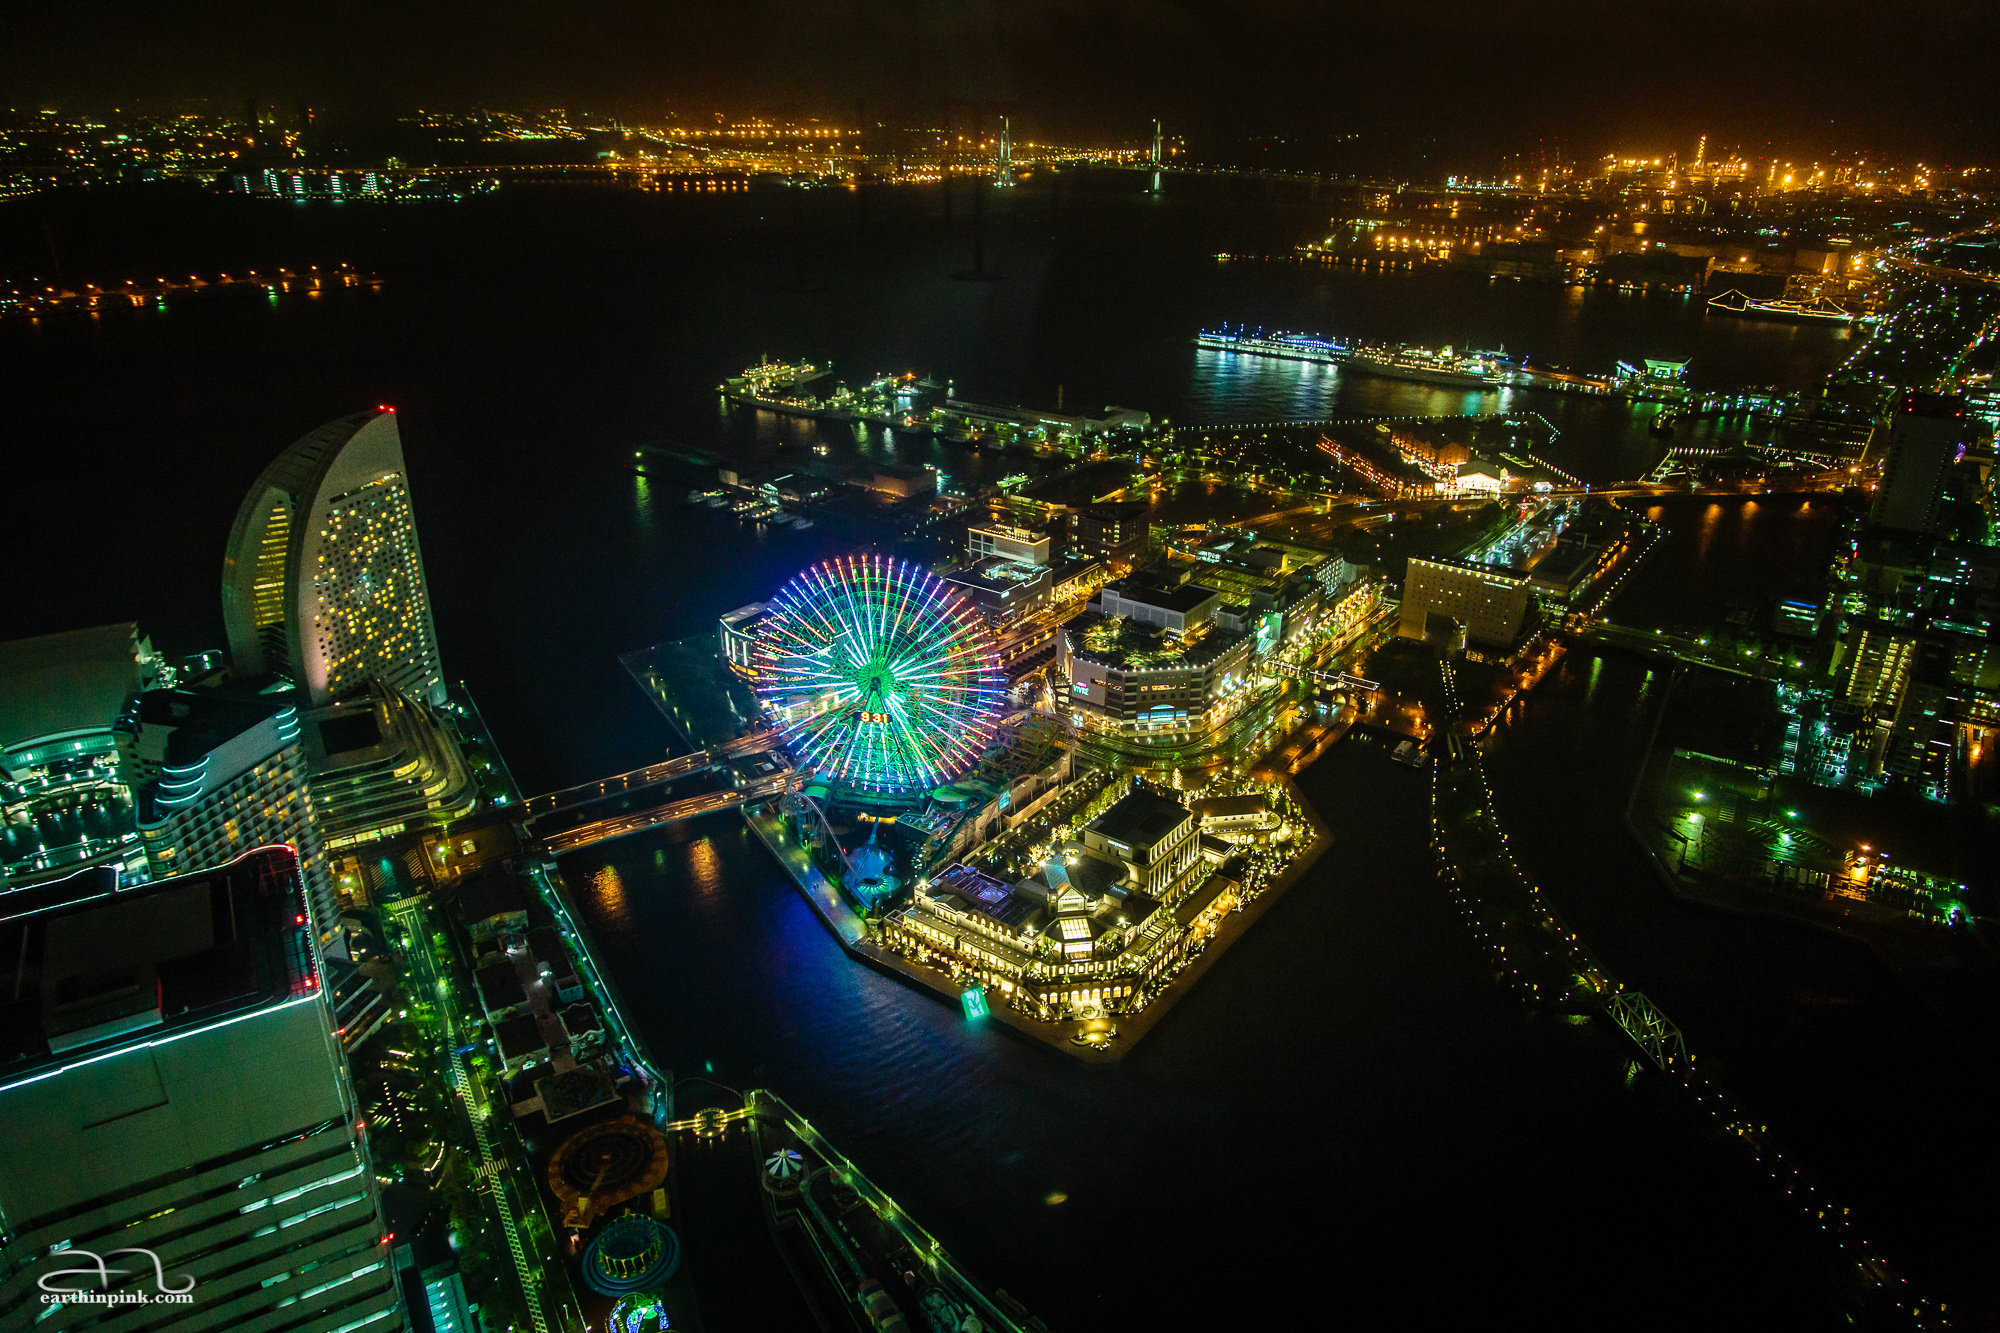 The clock on the Ferris wheel at the Cosmo World amusement park in Yokohama never lets you forget that you took the photo from the top of the Landmark Tower just at closing time, when the helpful staff were politely trying to get you to leave.